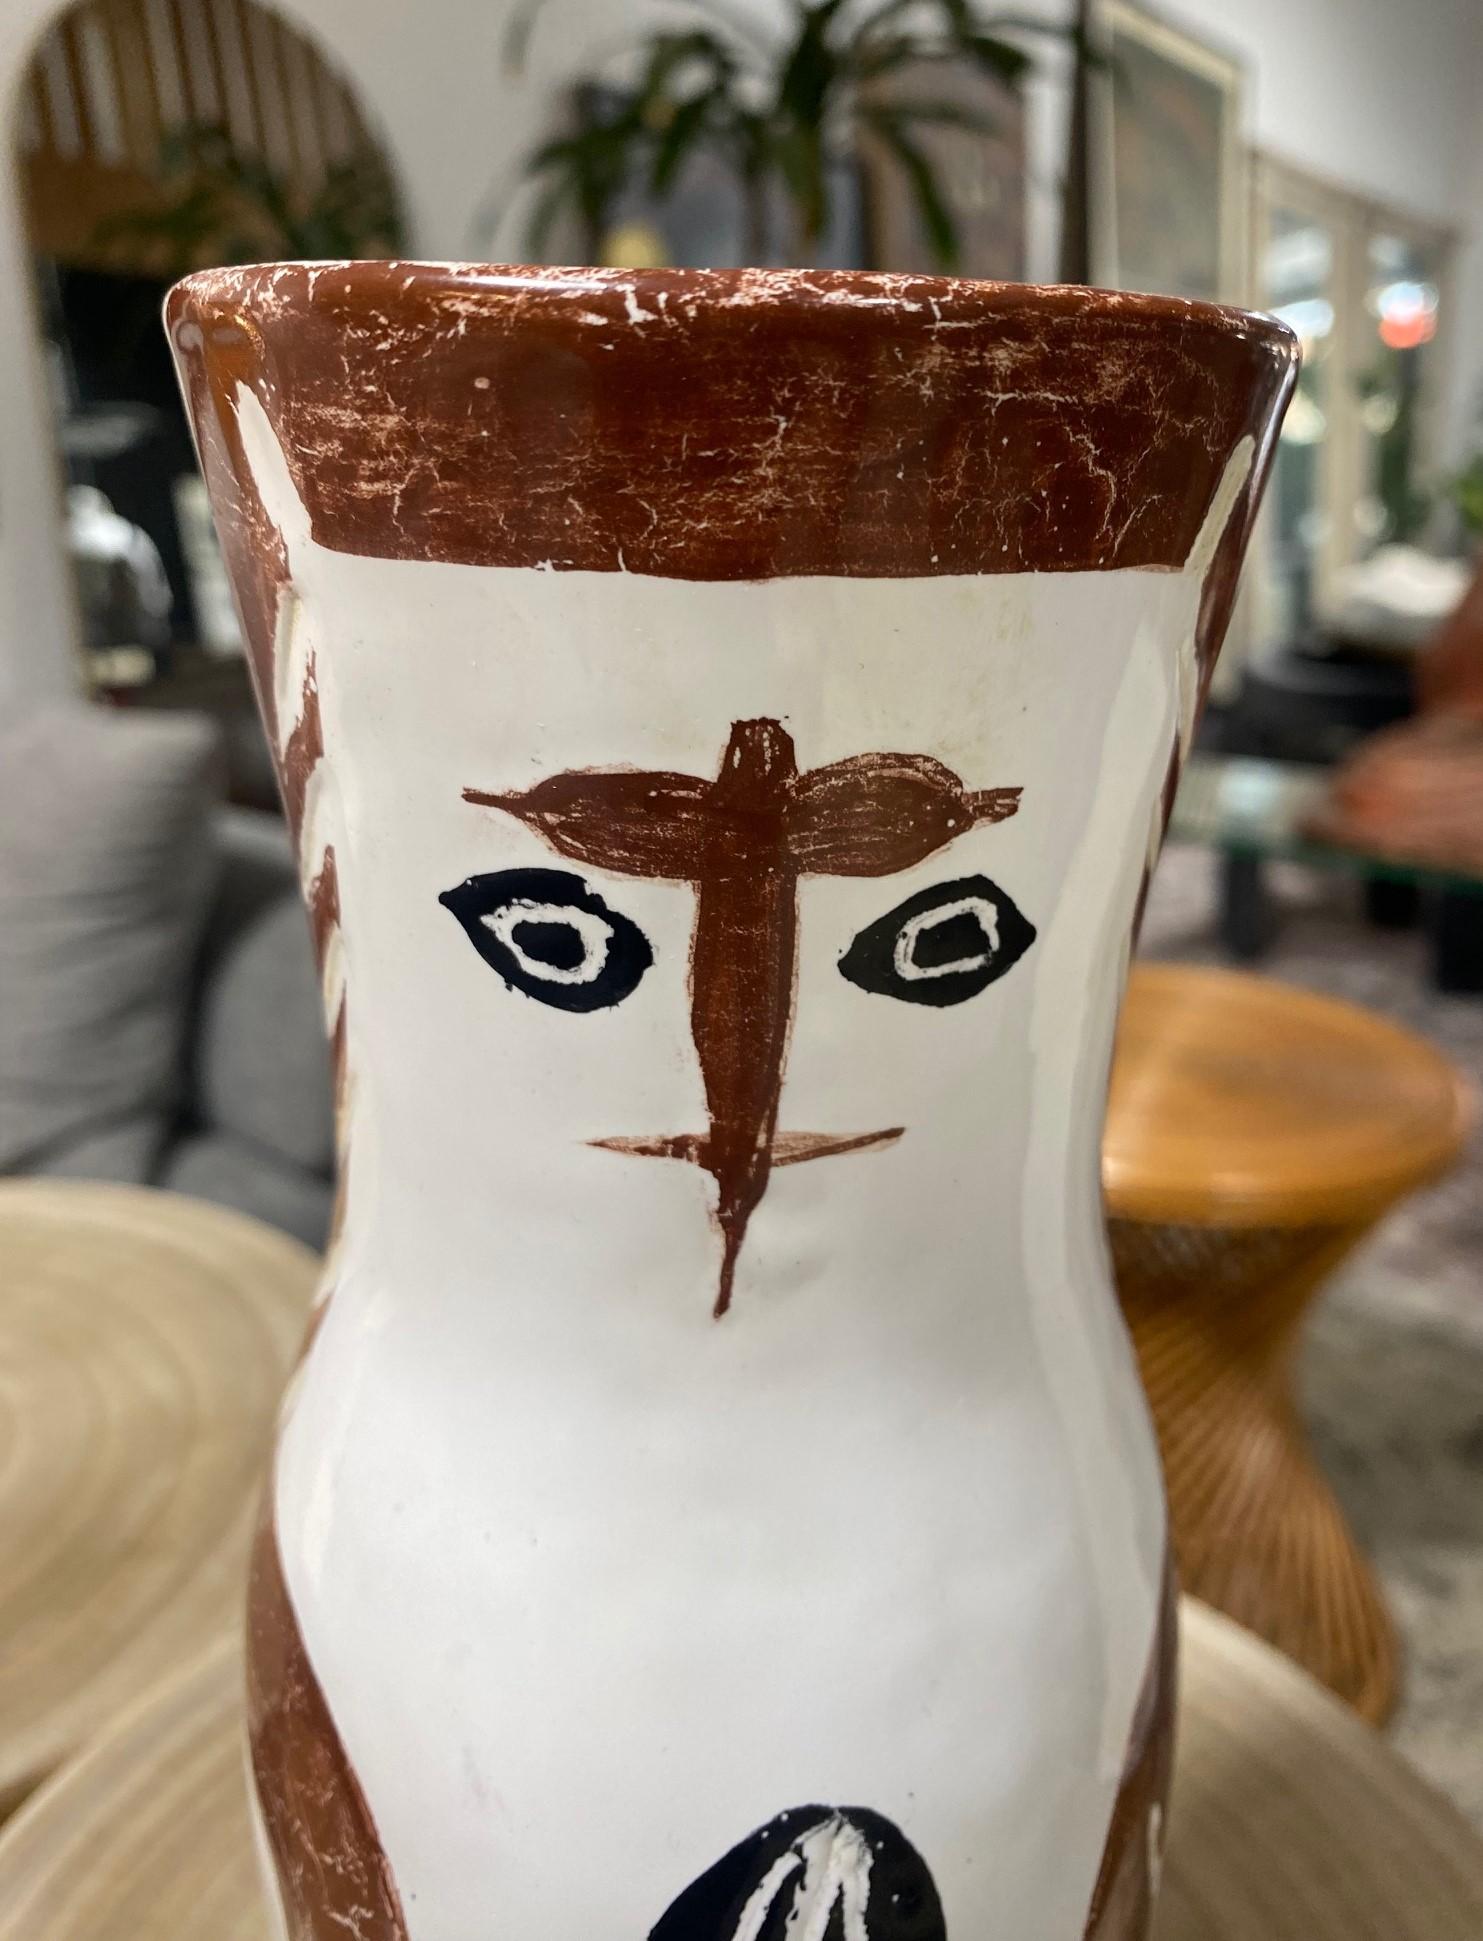 Pablo Picasso Signed Limited Madoura Pottery Chouetton Owl Vase A.R. 135, 1952 In Good Condition For Sale In Studio City, CA